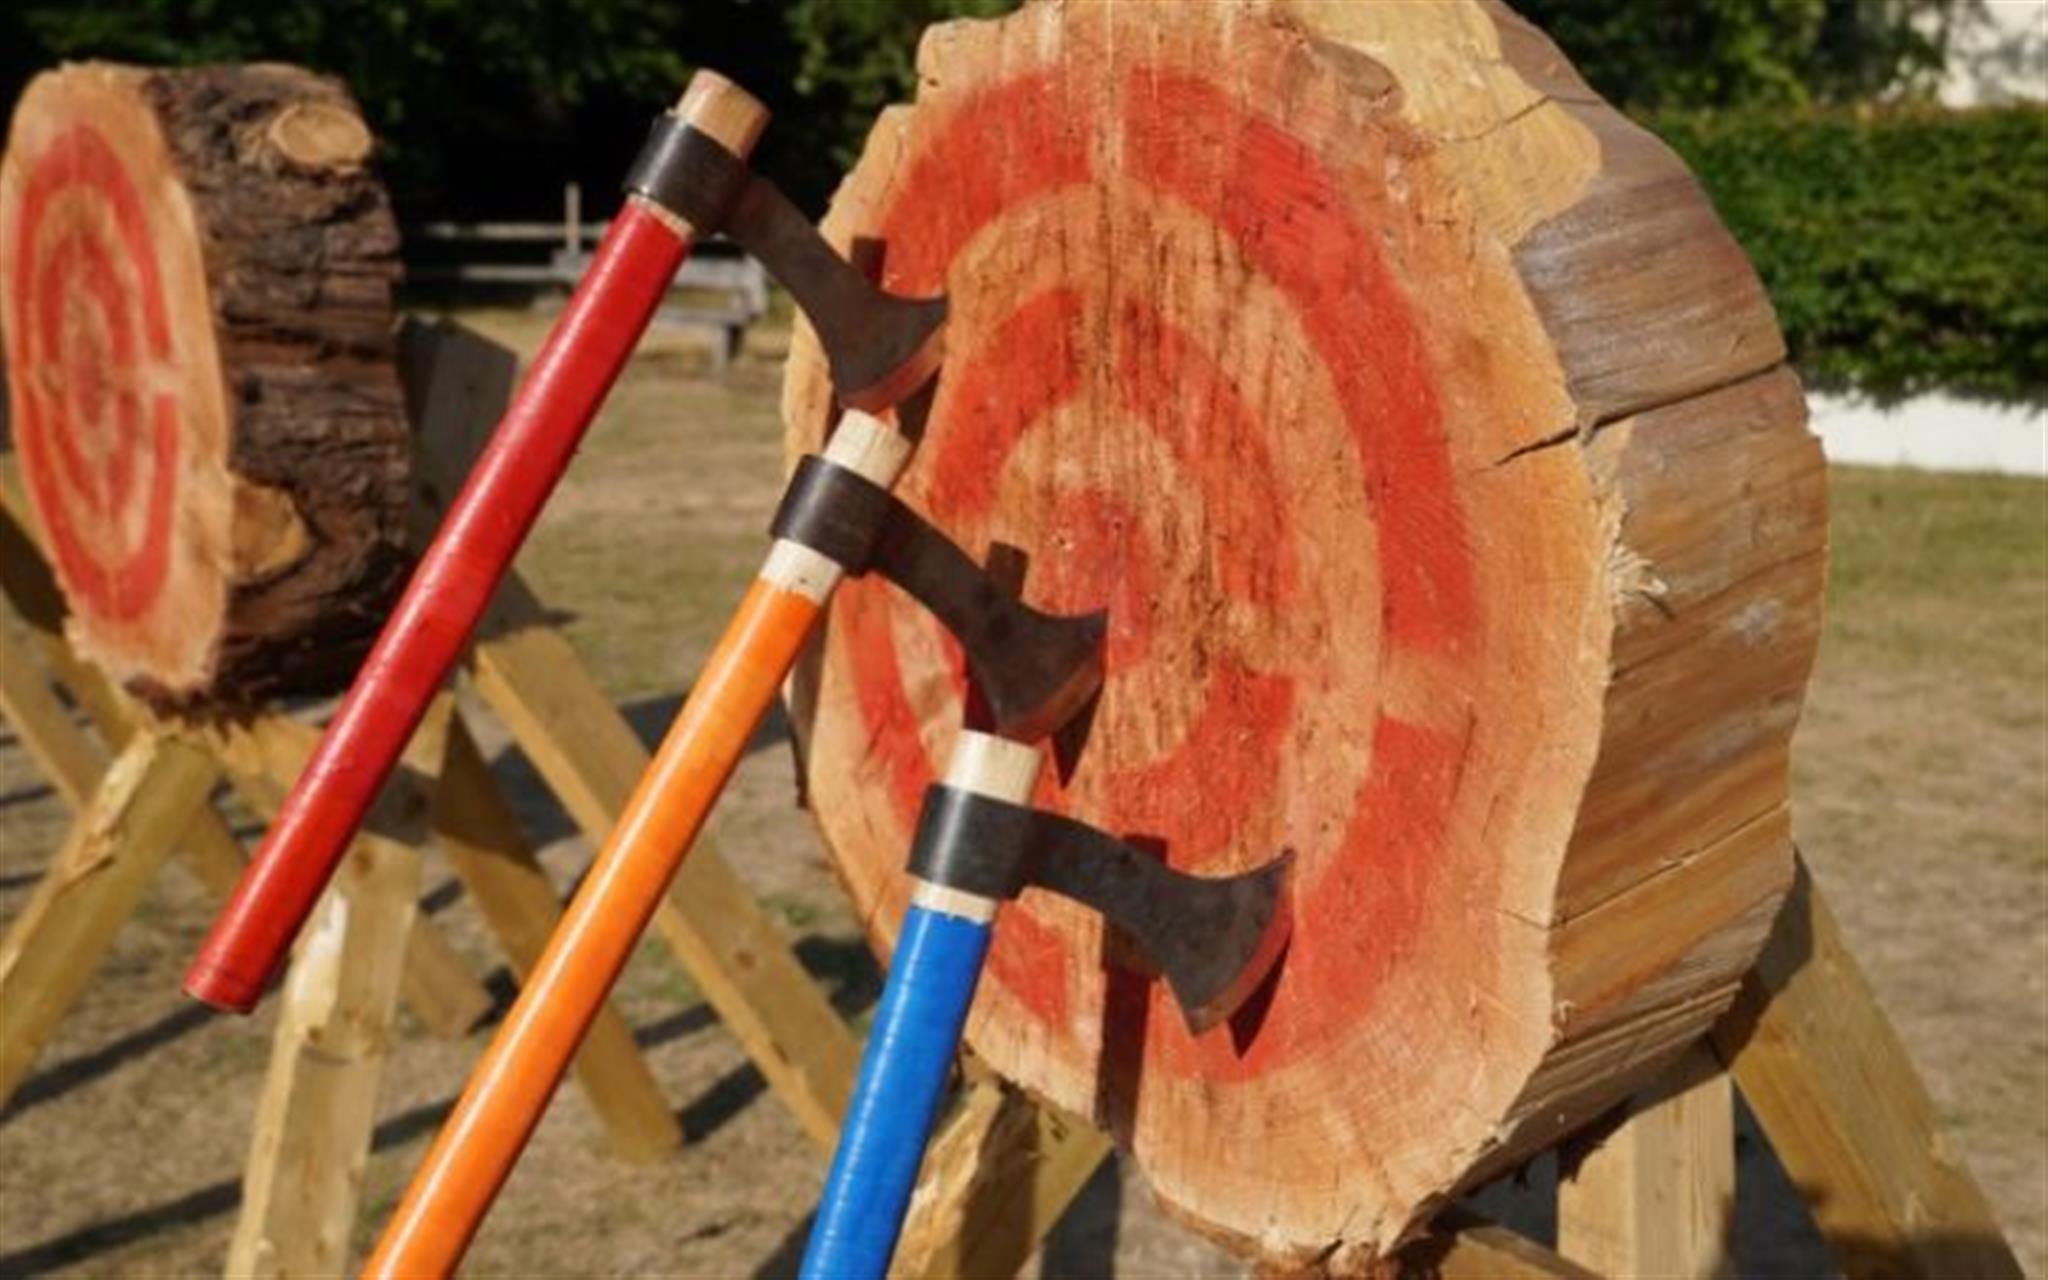 Axe & Knife Throwing - West Stow